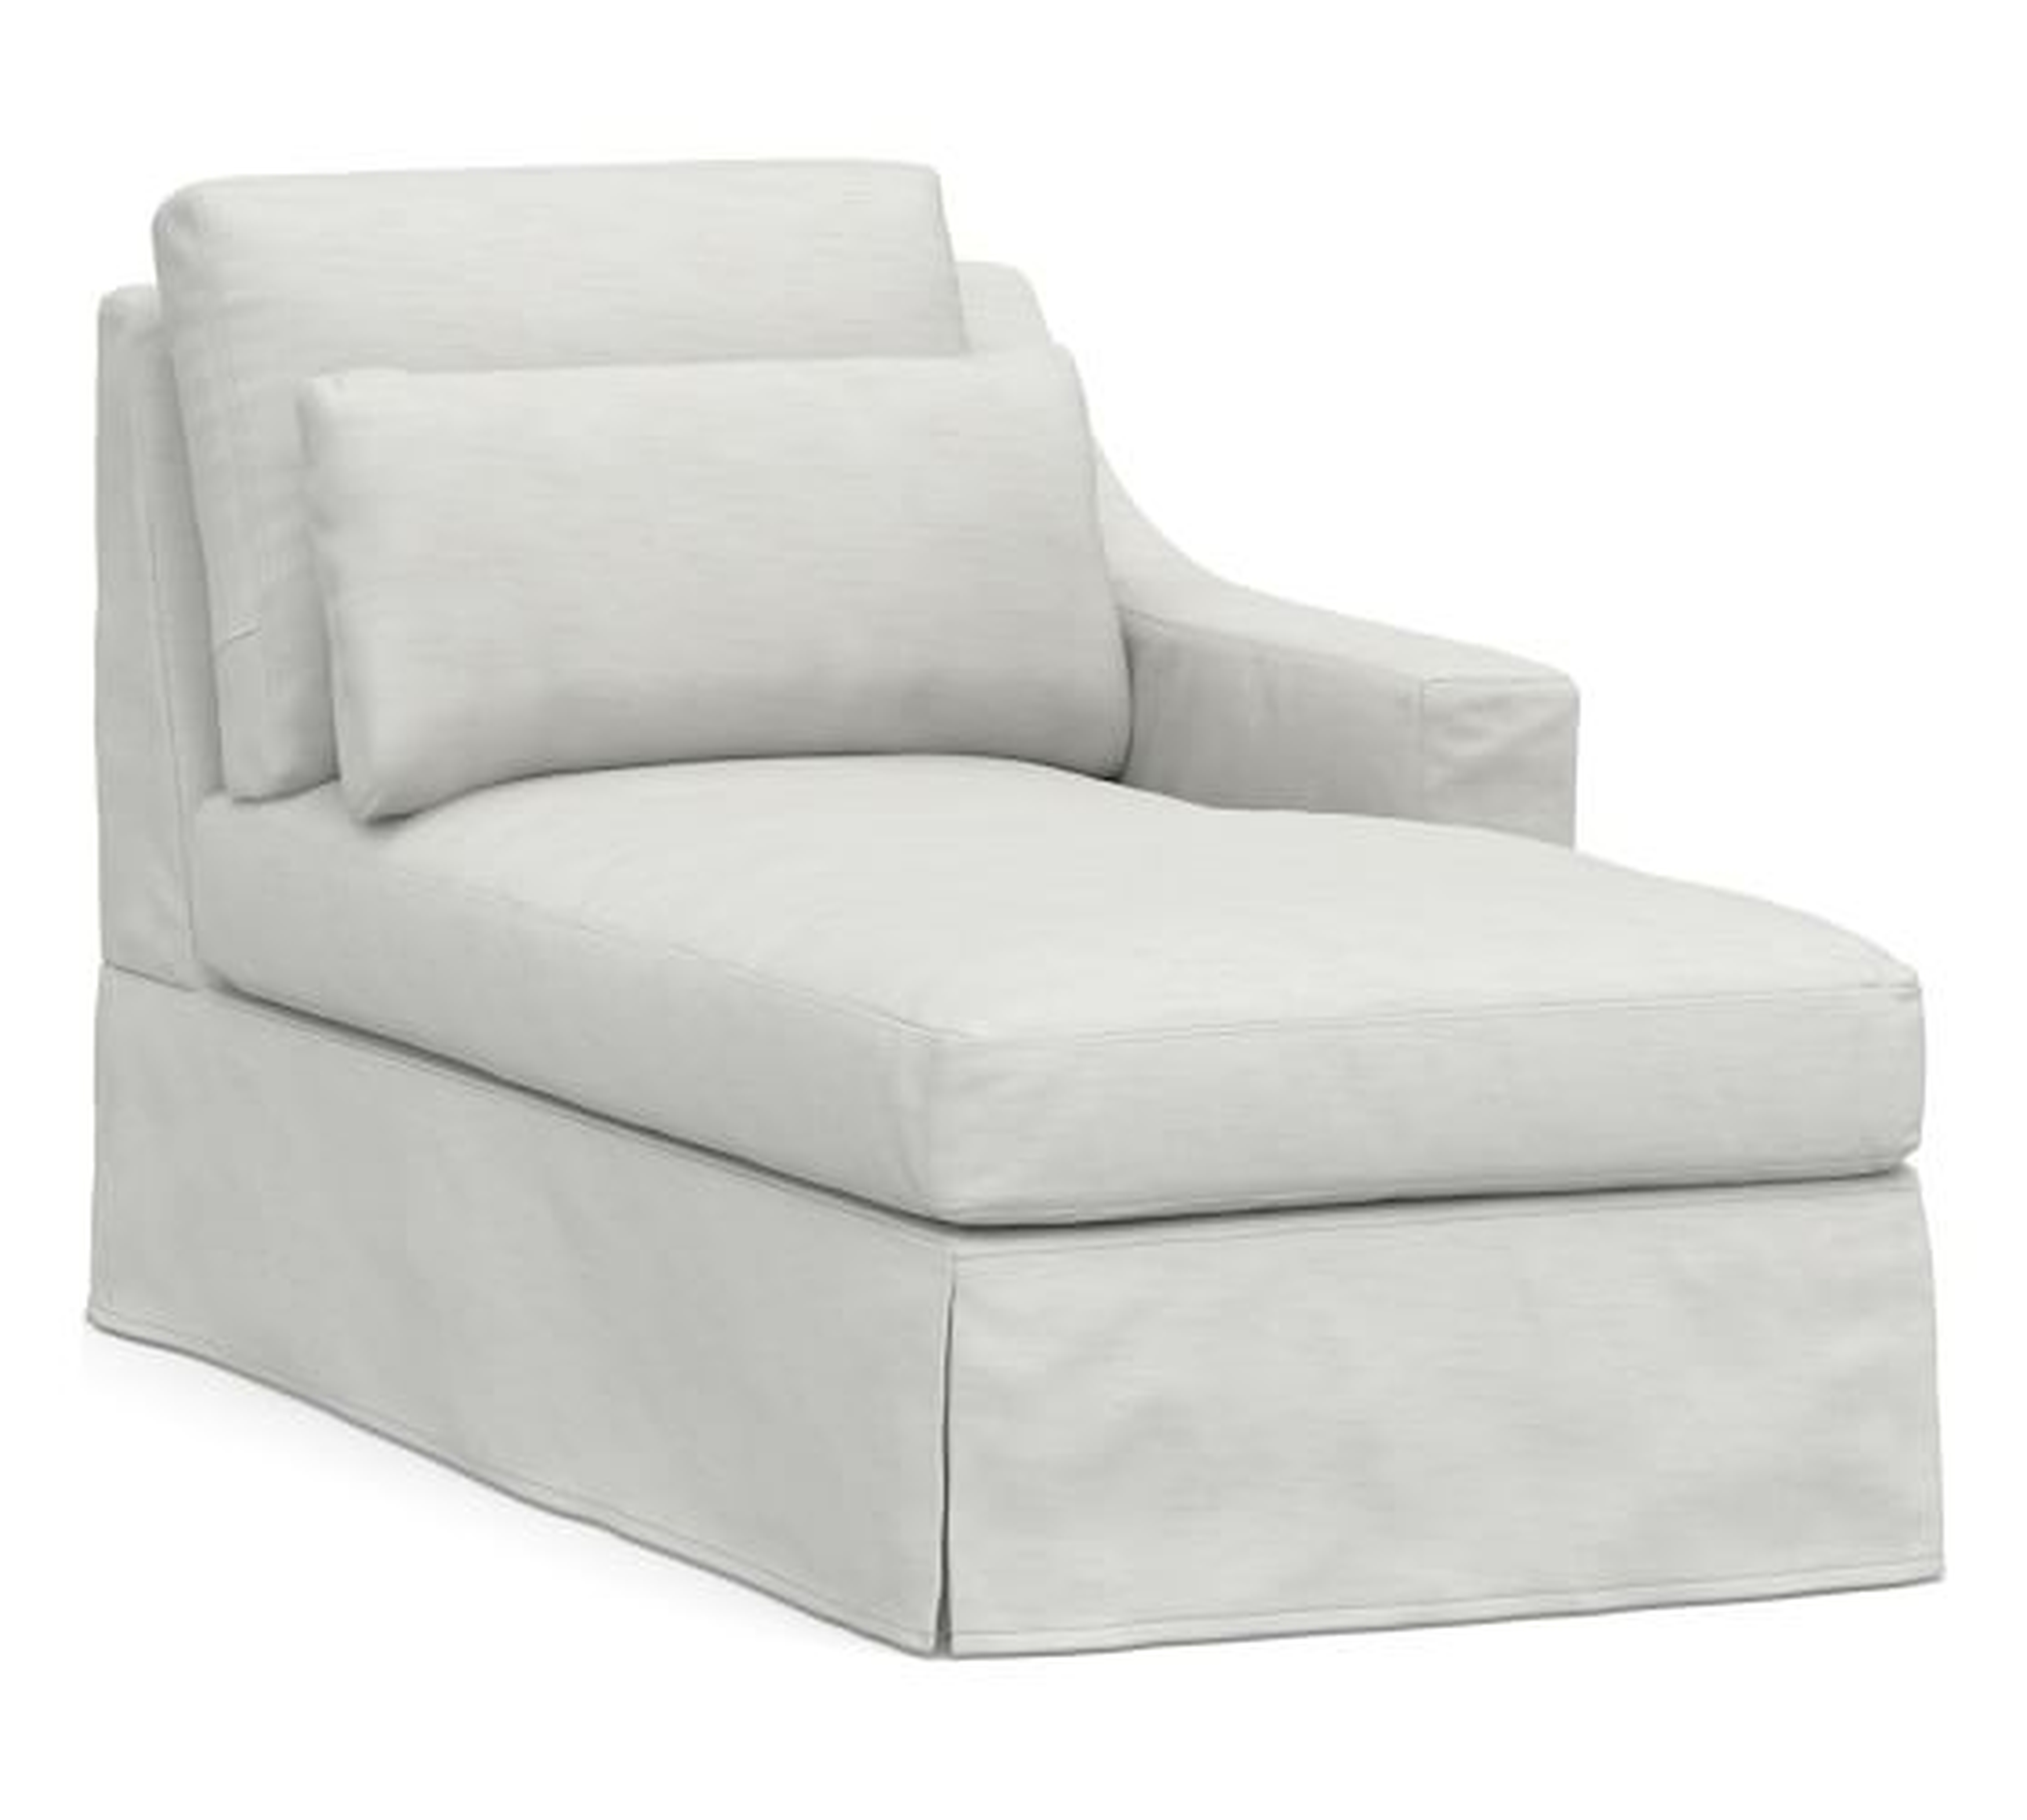 York Slope Arm Slipcovered Deep Seat Right-arm Chaise, Down Blend Wrapped Cushions, Performance Slub Cotton White - Pottery Barn